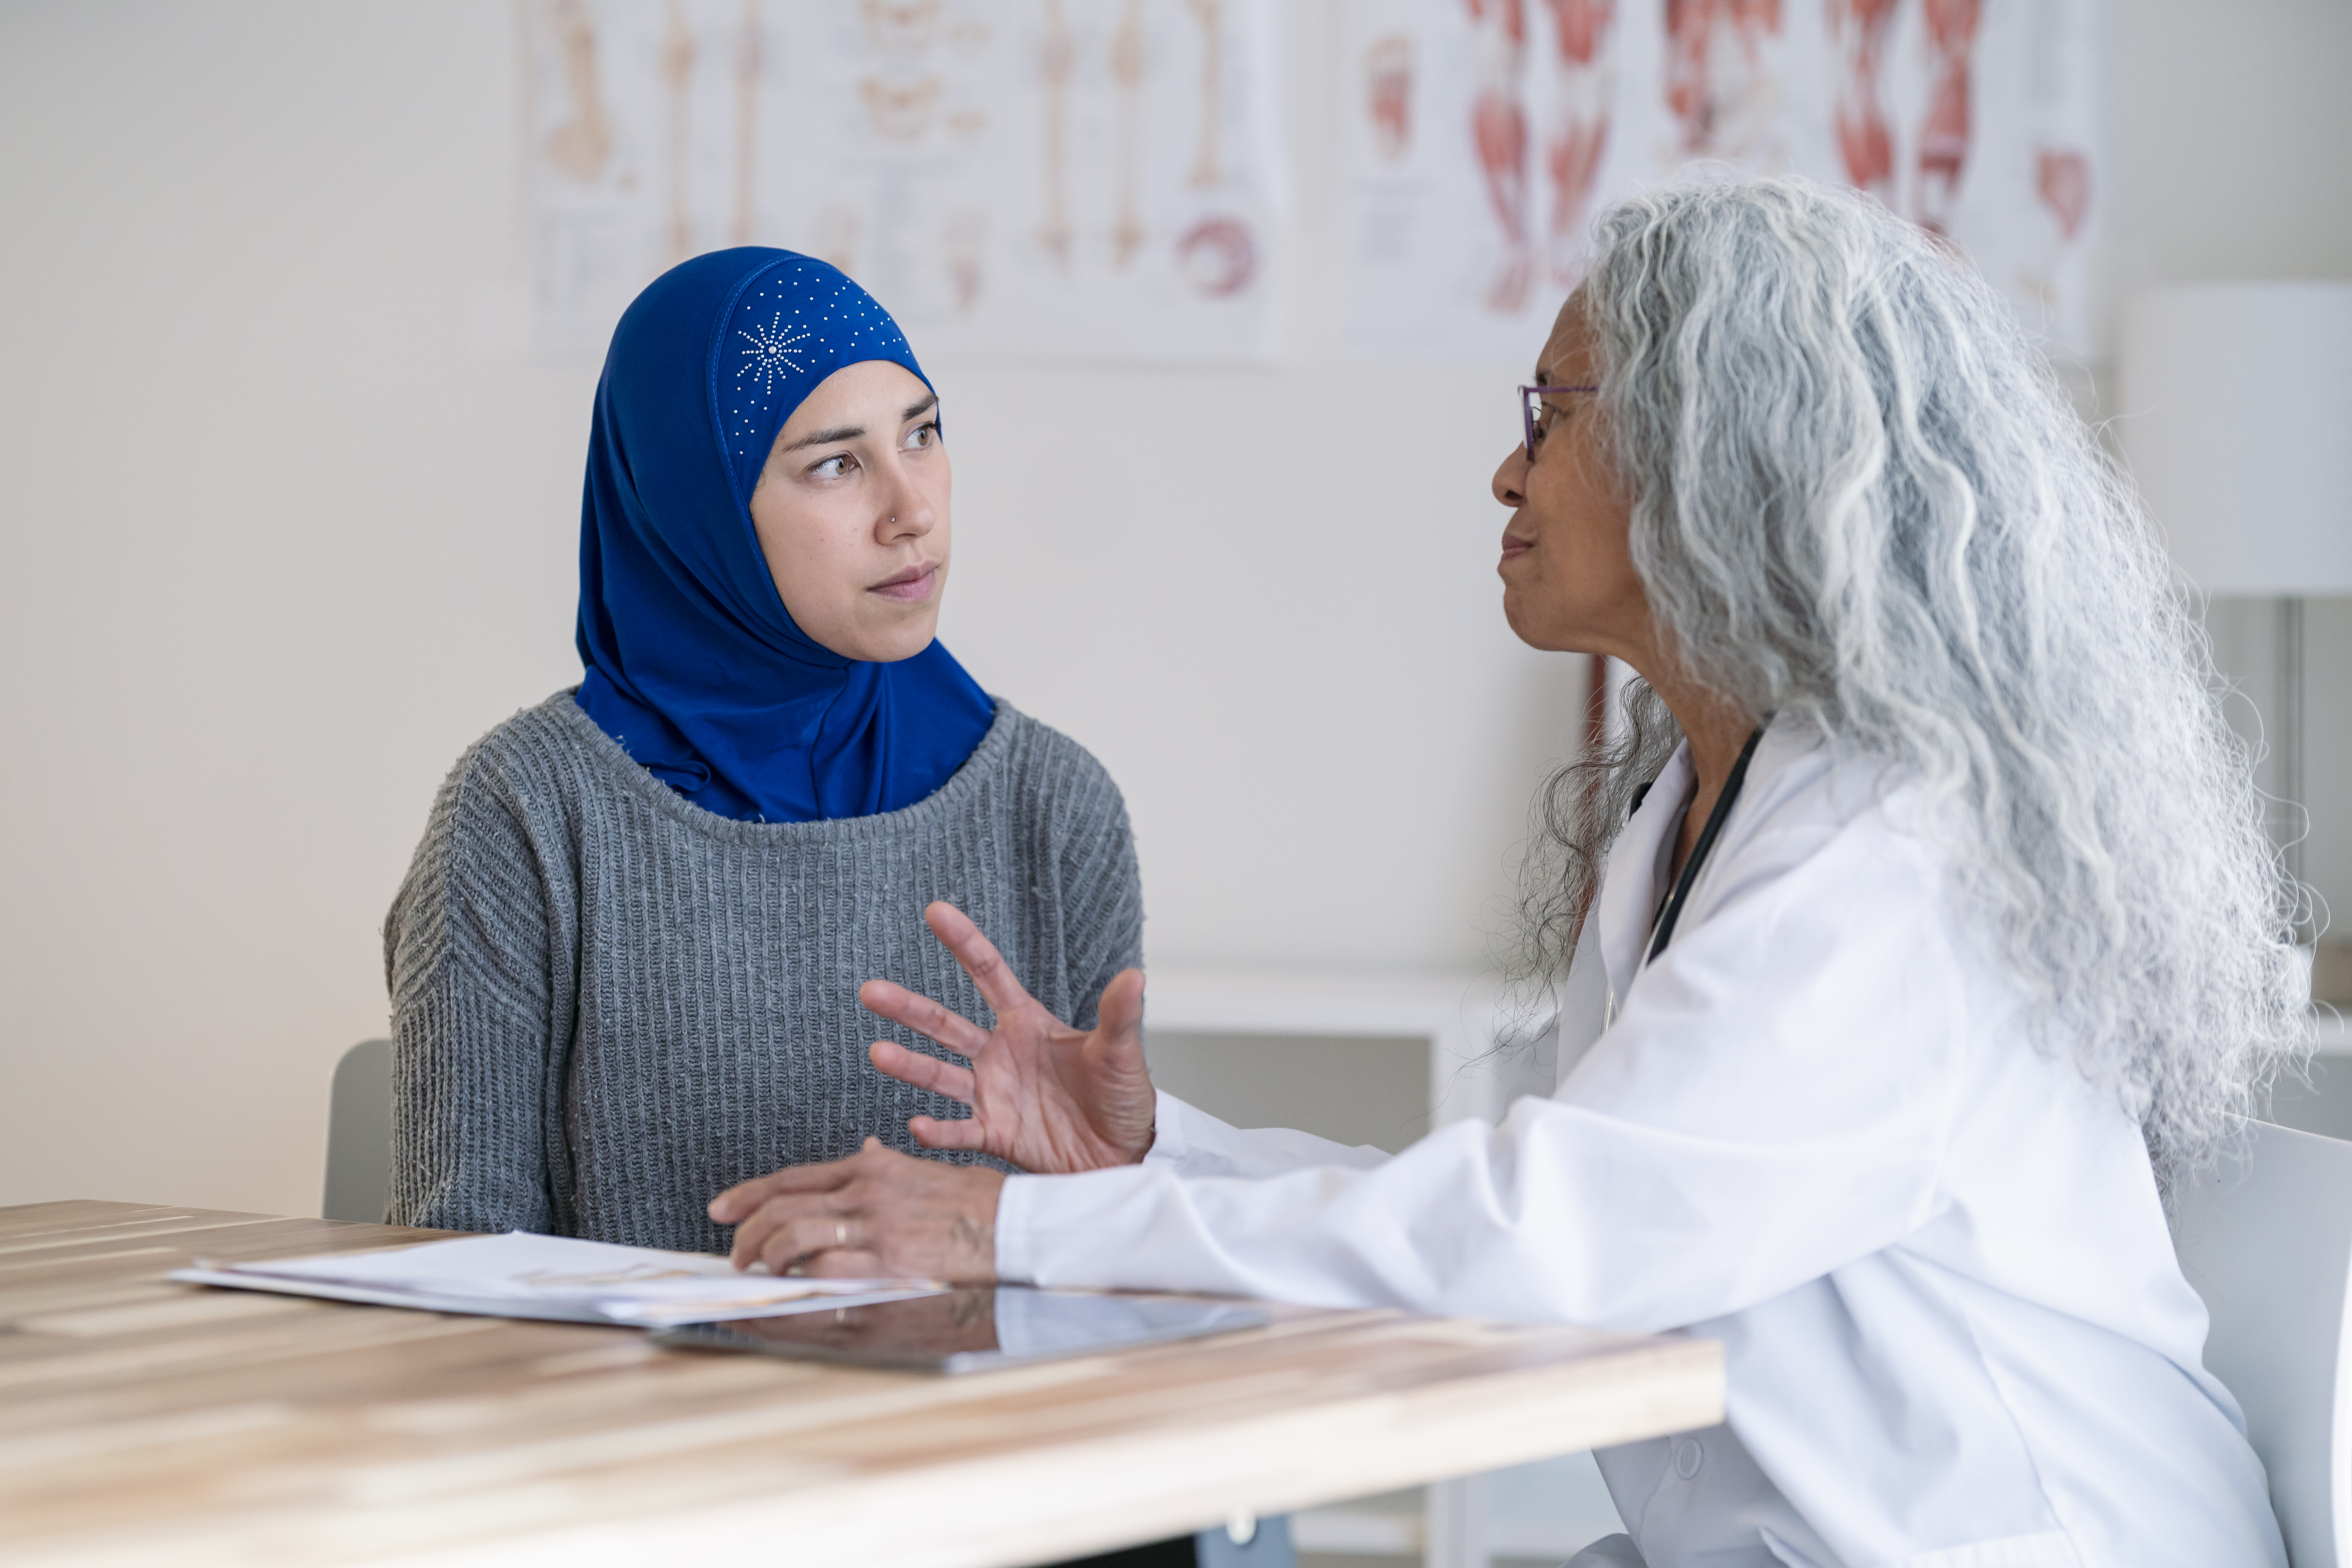 Muslim woman wearing a hijab is having a wellness check with her primary care doctor